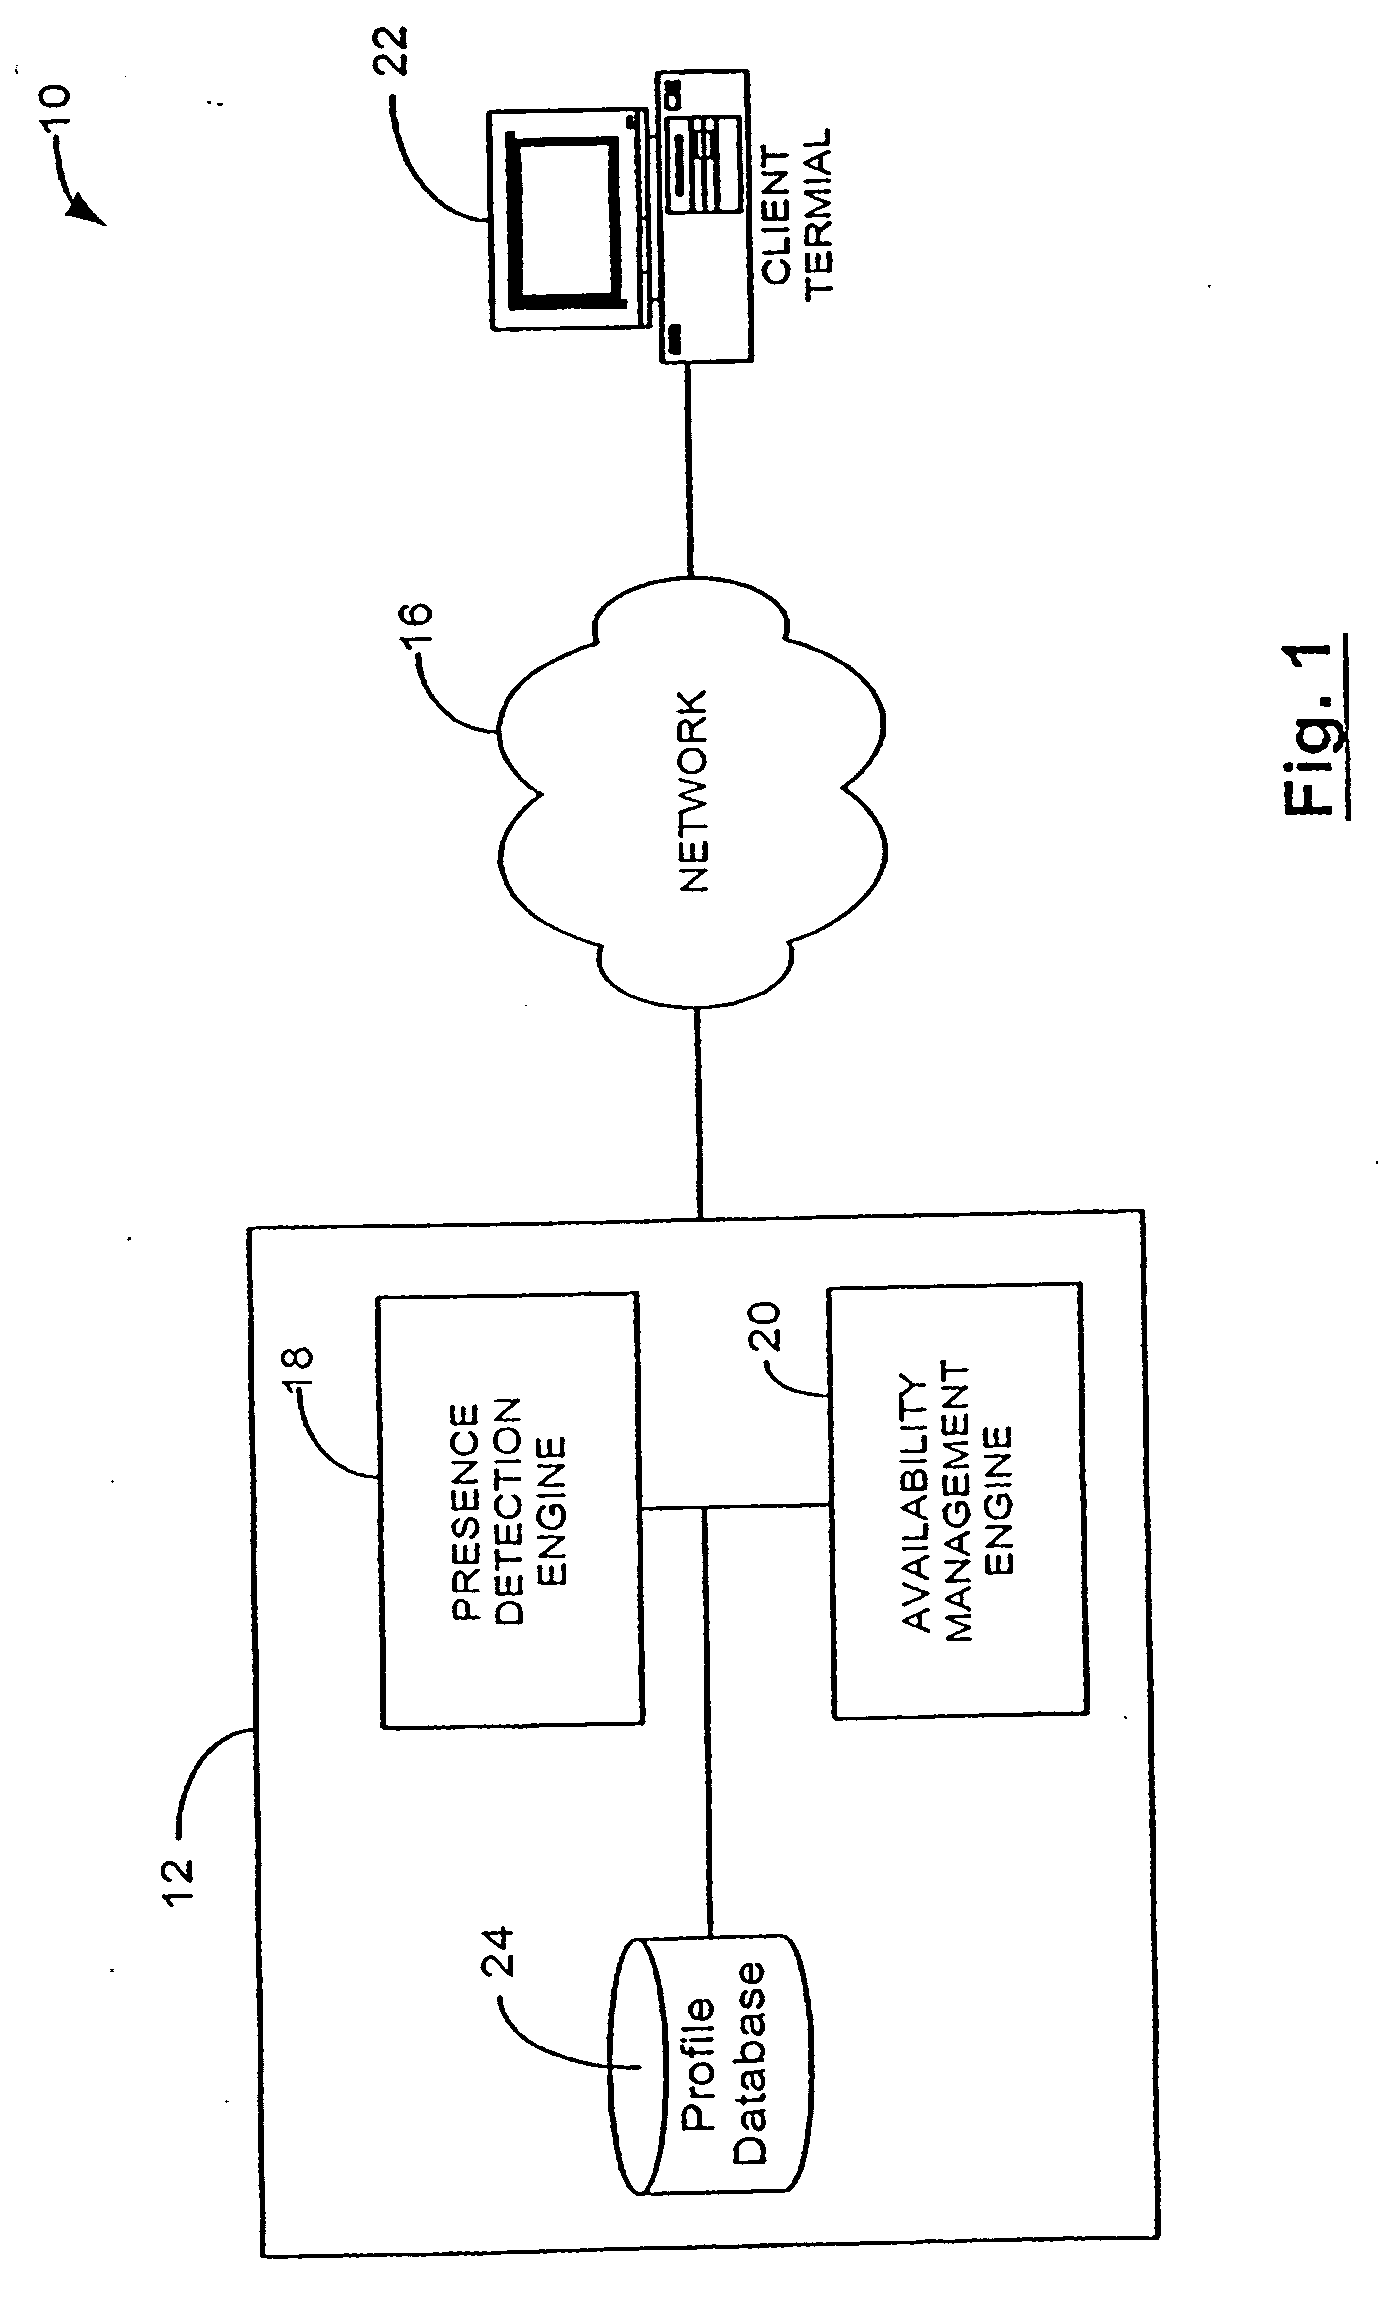 System and method for filtering unavailable devices in a presence and availability management system